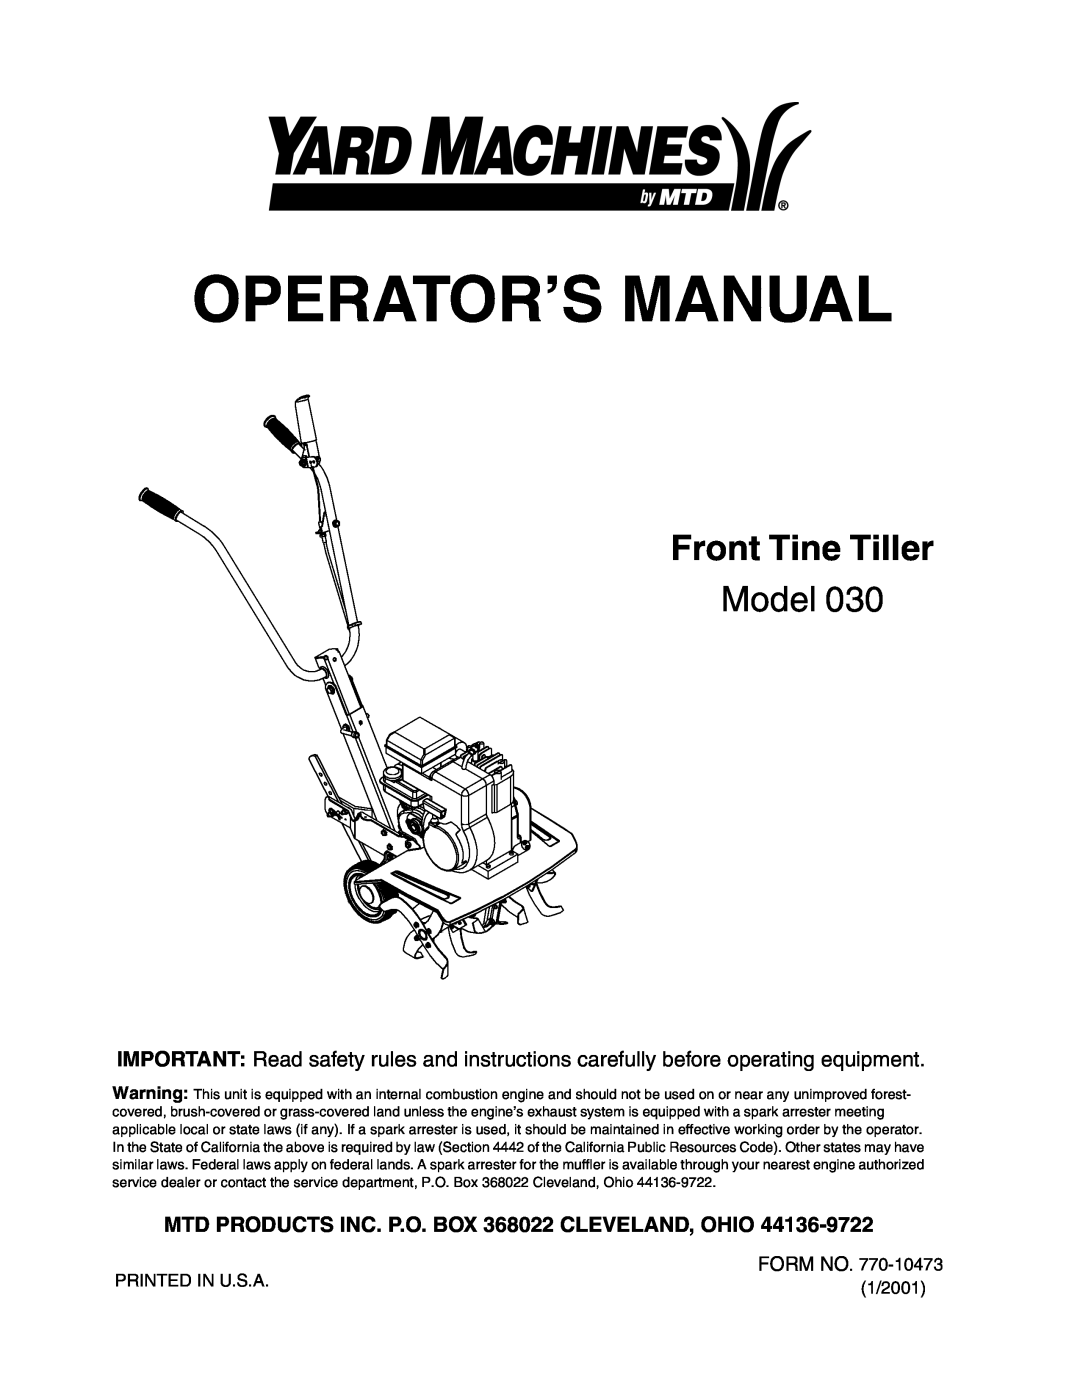 Yard Machines 30 manual Operator’S Manual, Front Tine Tiller, Model, MTD PRODUCTS INC. P.O. BOX 368022 CLEVELAND, OHIO 